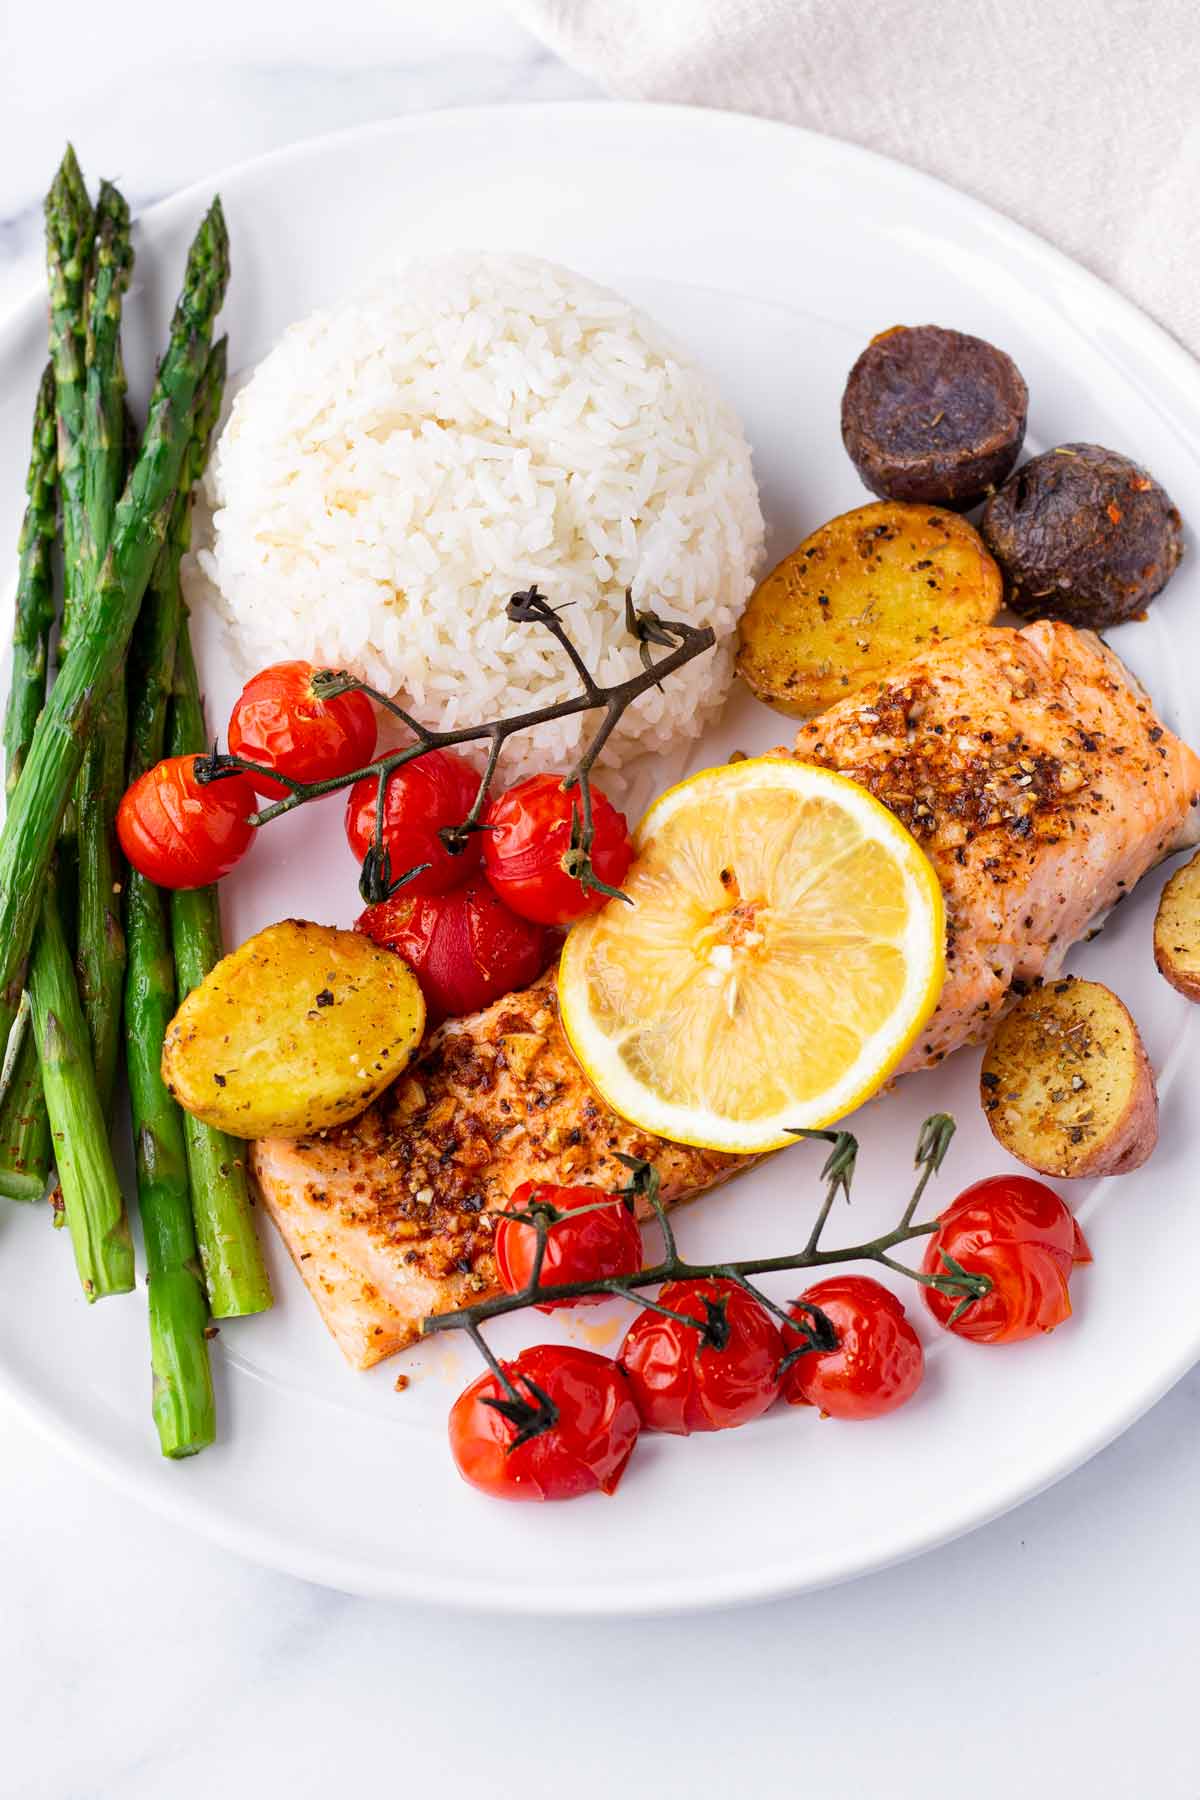 a plate with asparagus, tomatoes, potatoes, salmon, and rice